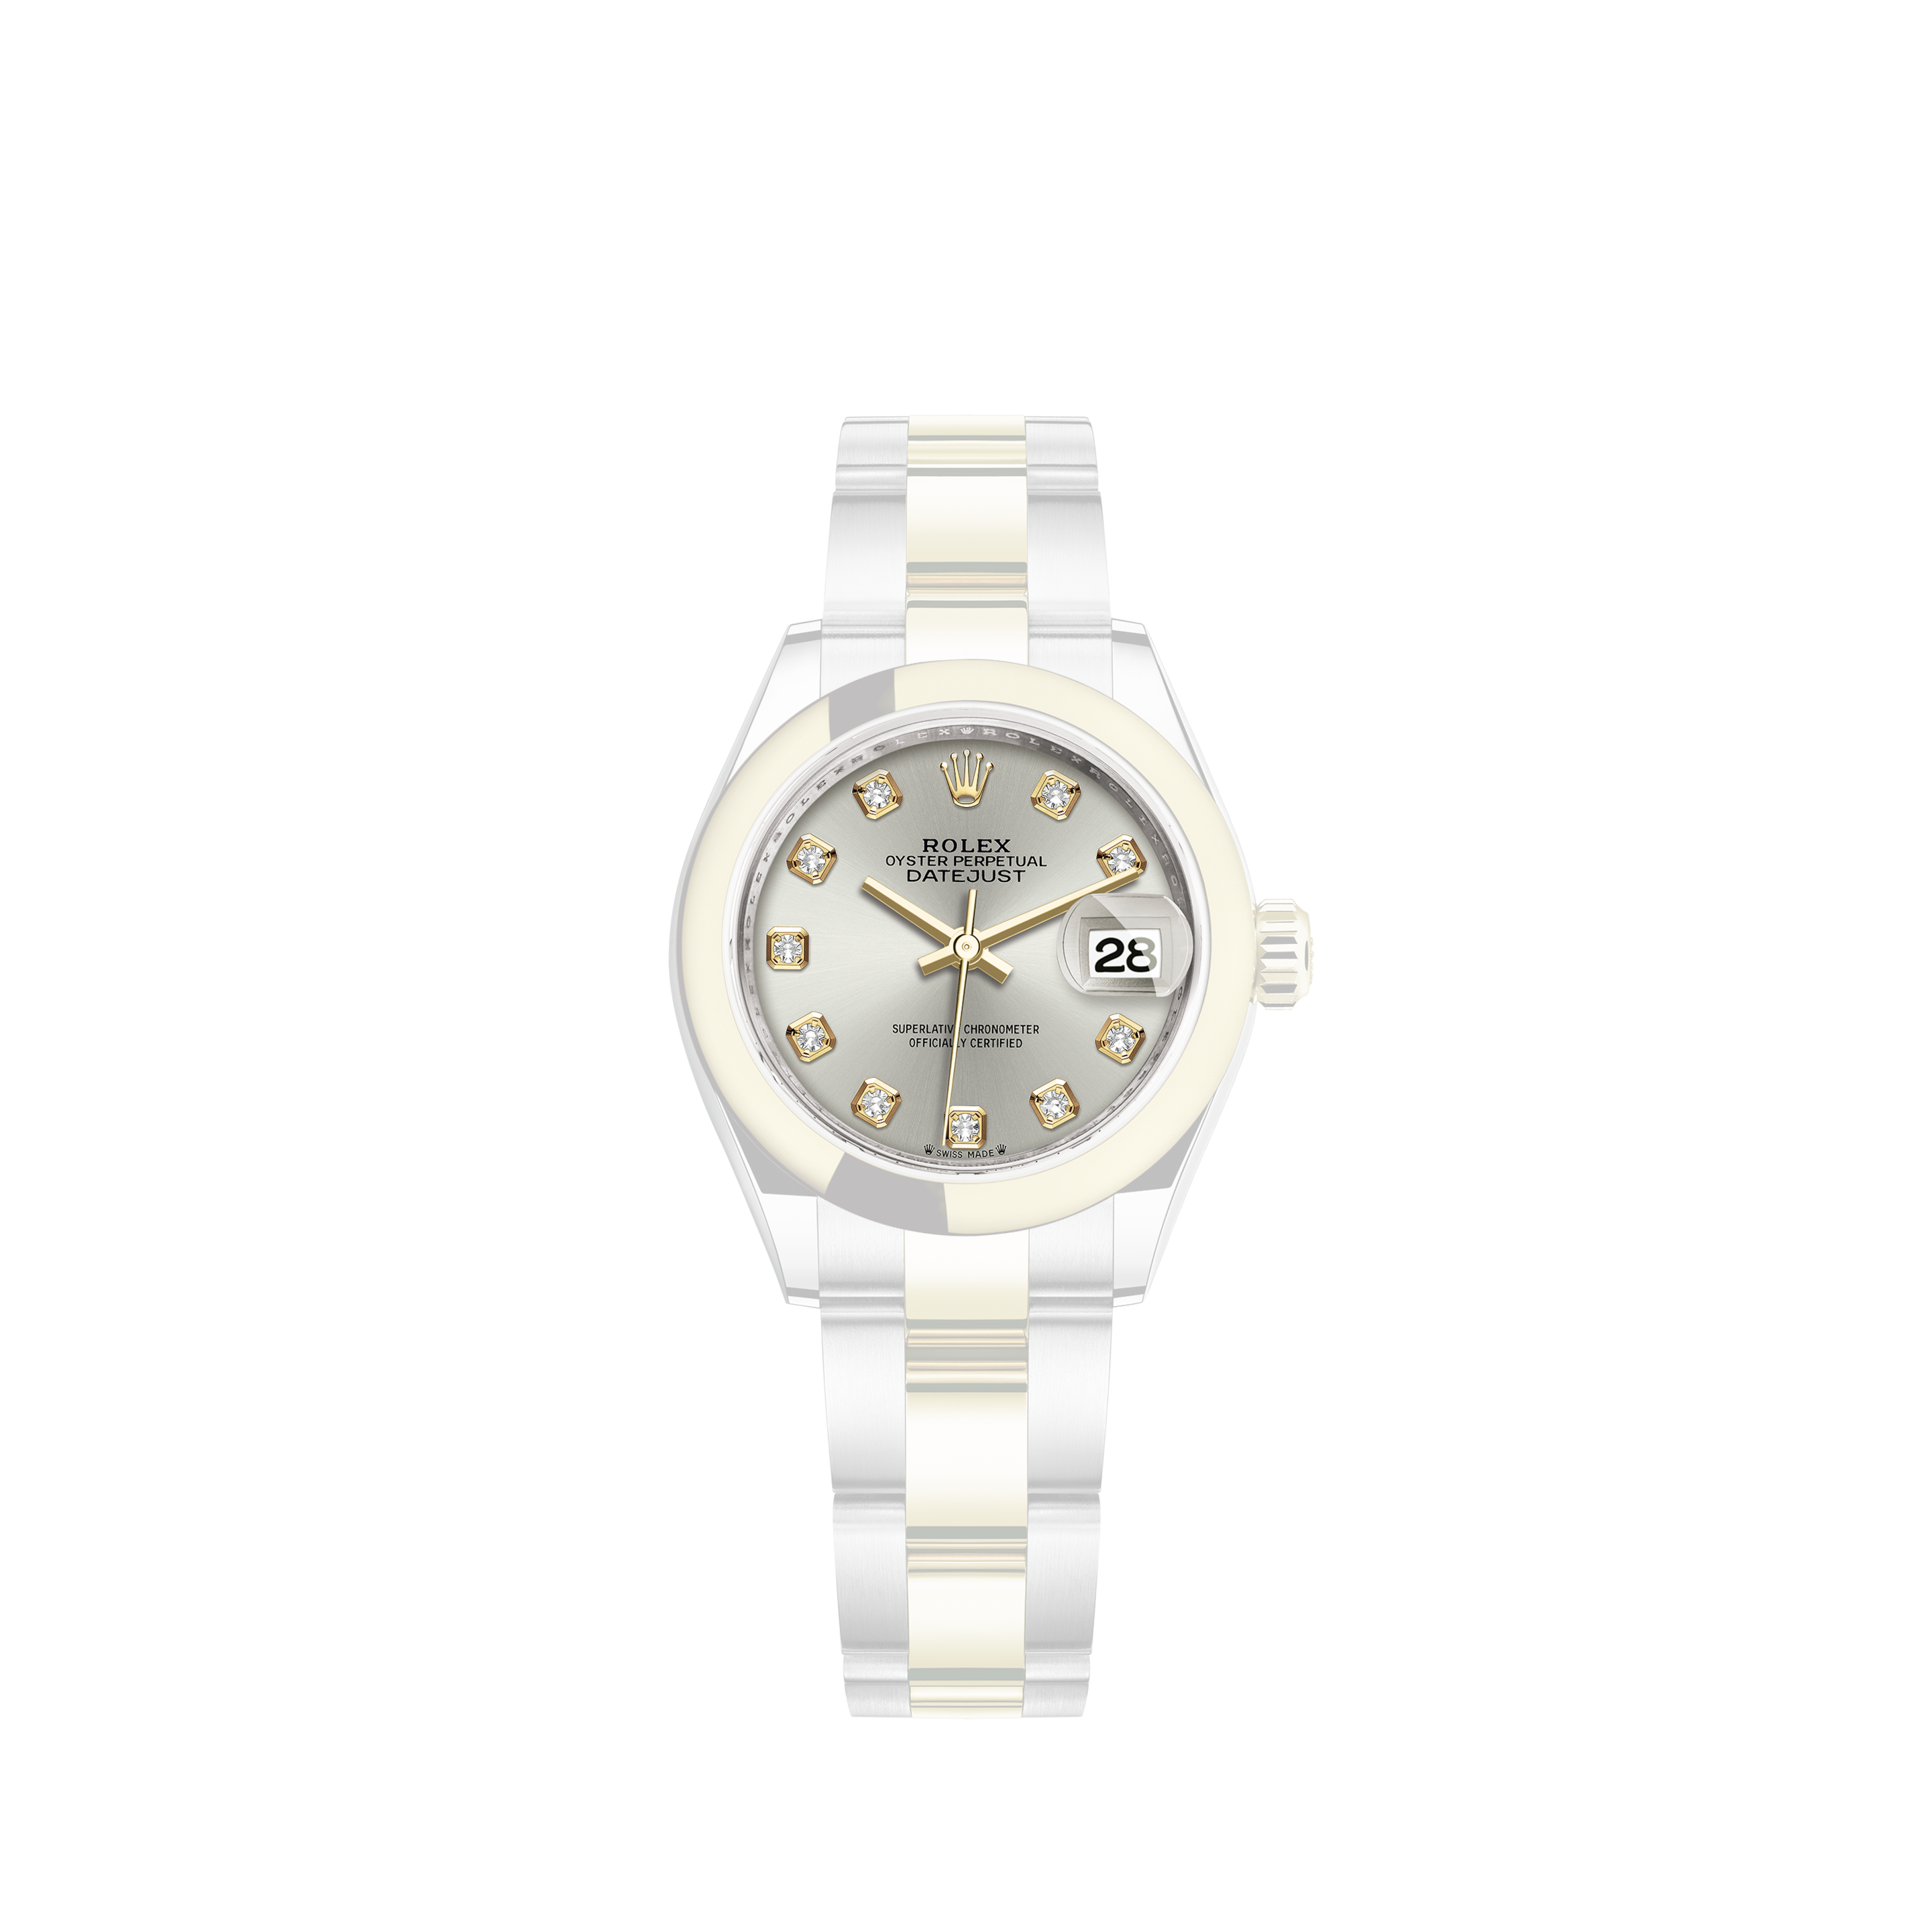 Rolex Datejust 36mm - Steel and Gold Pink Gold - Fluted Bezel - Oyster 126231 DKRDR69ORolex Datejust 36mm - Steel and Gold Pink Gold - Fluted Bezel - Oyster 126231 DKRIO